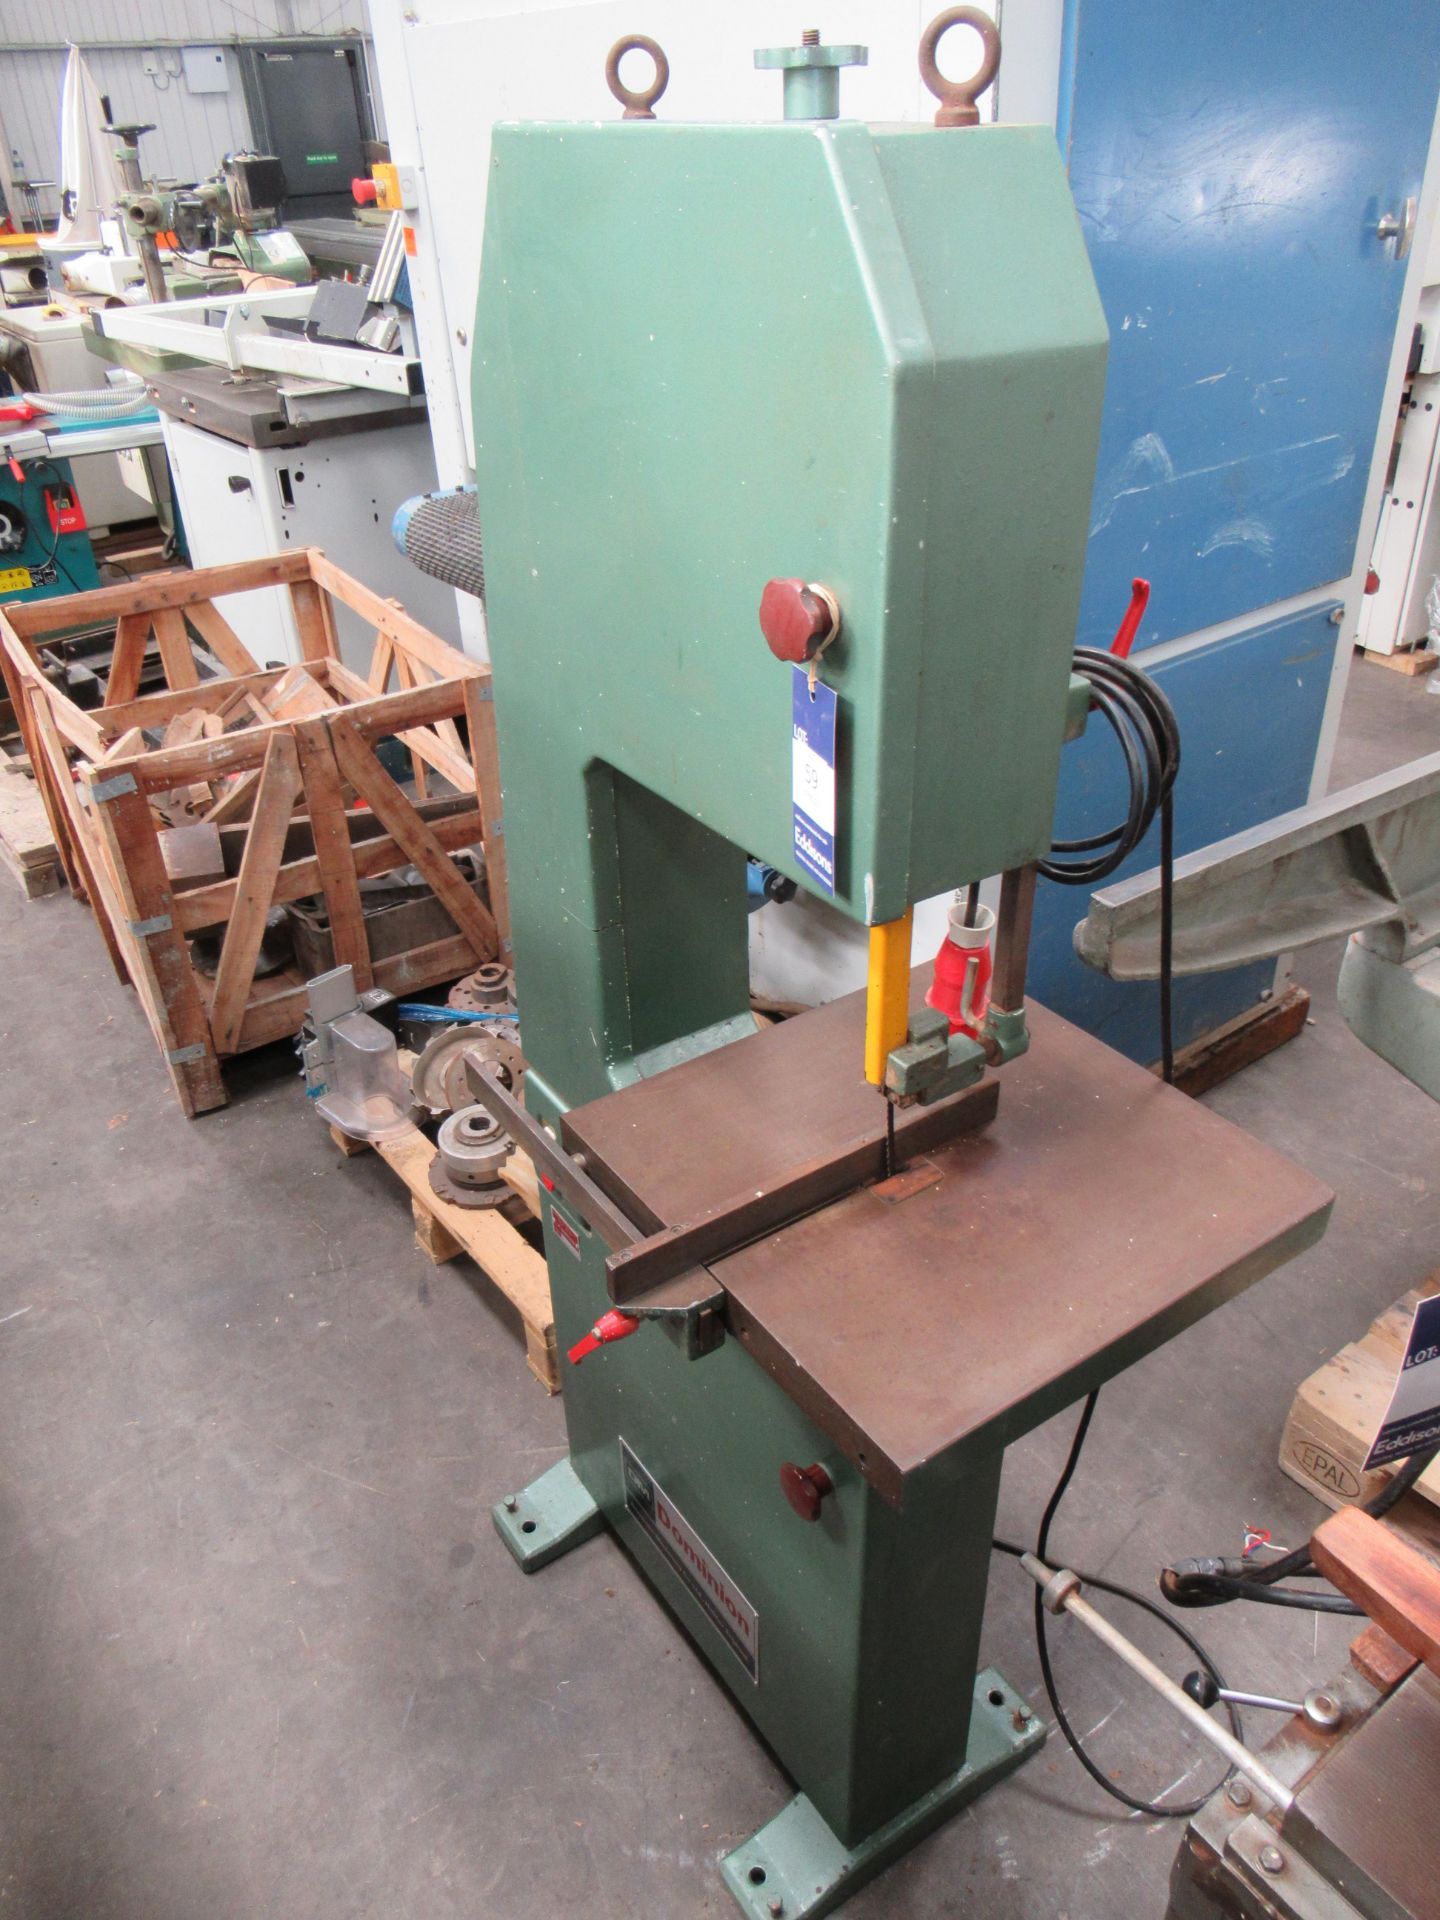 Dominion Vertical 14" Bandsaw No204, 3PH. - Image 2 of 6